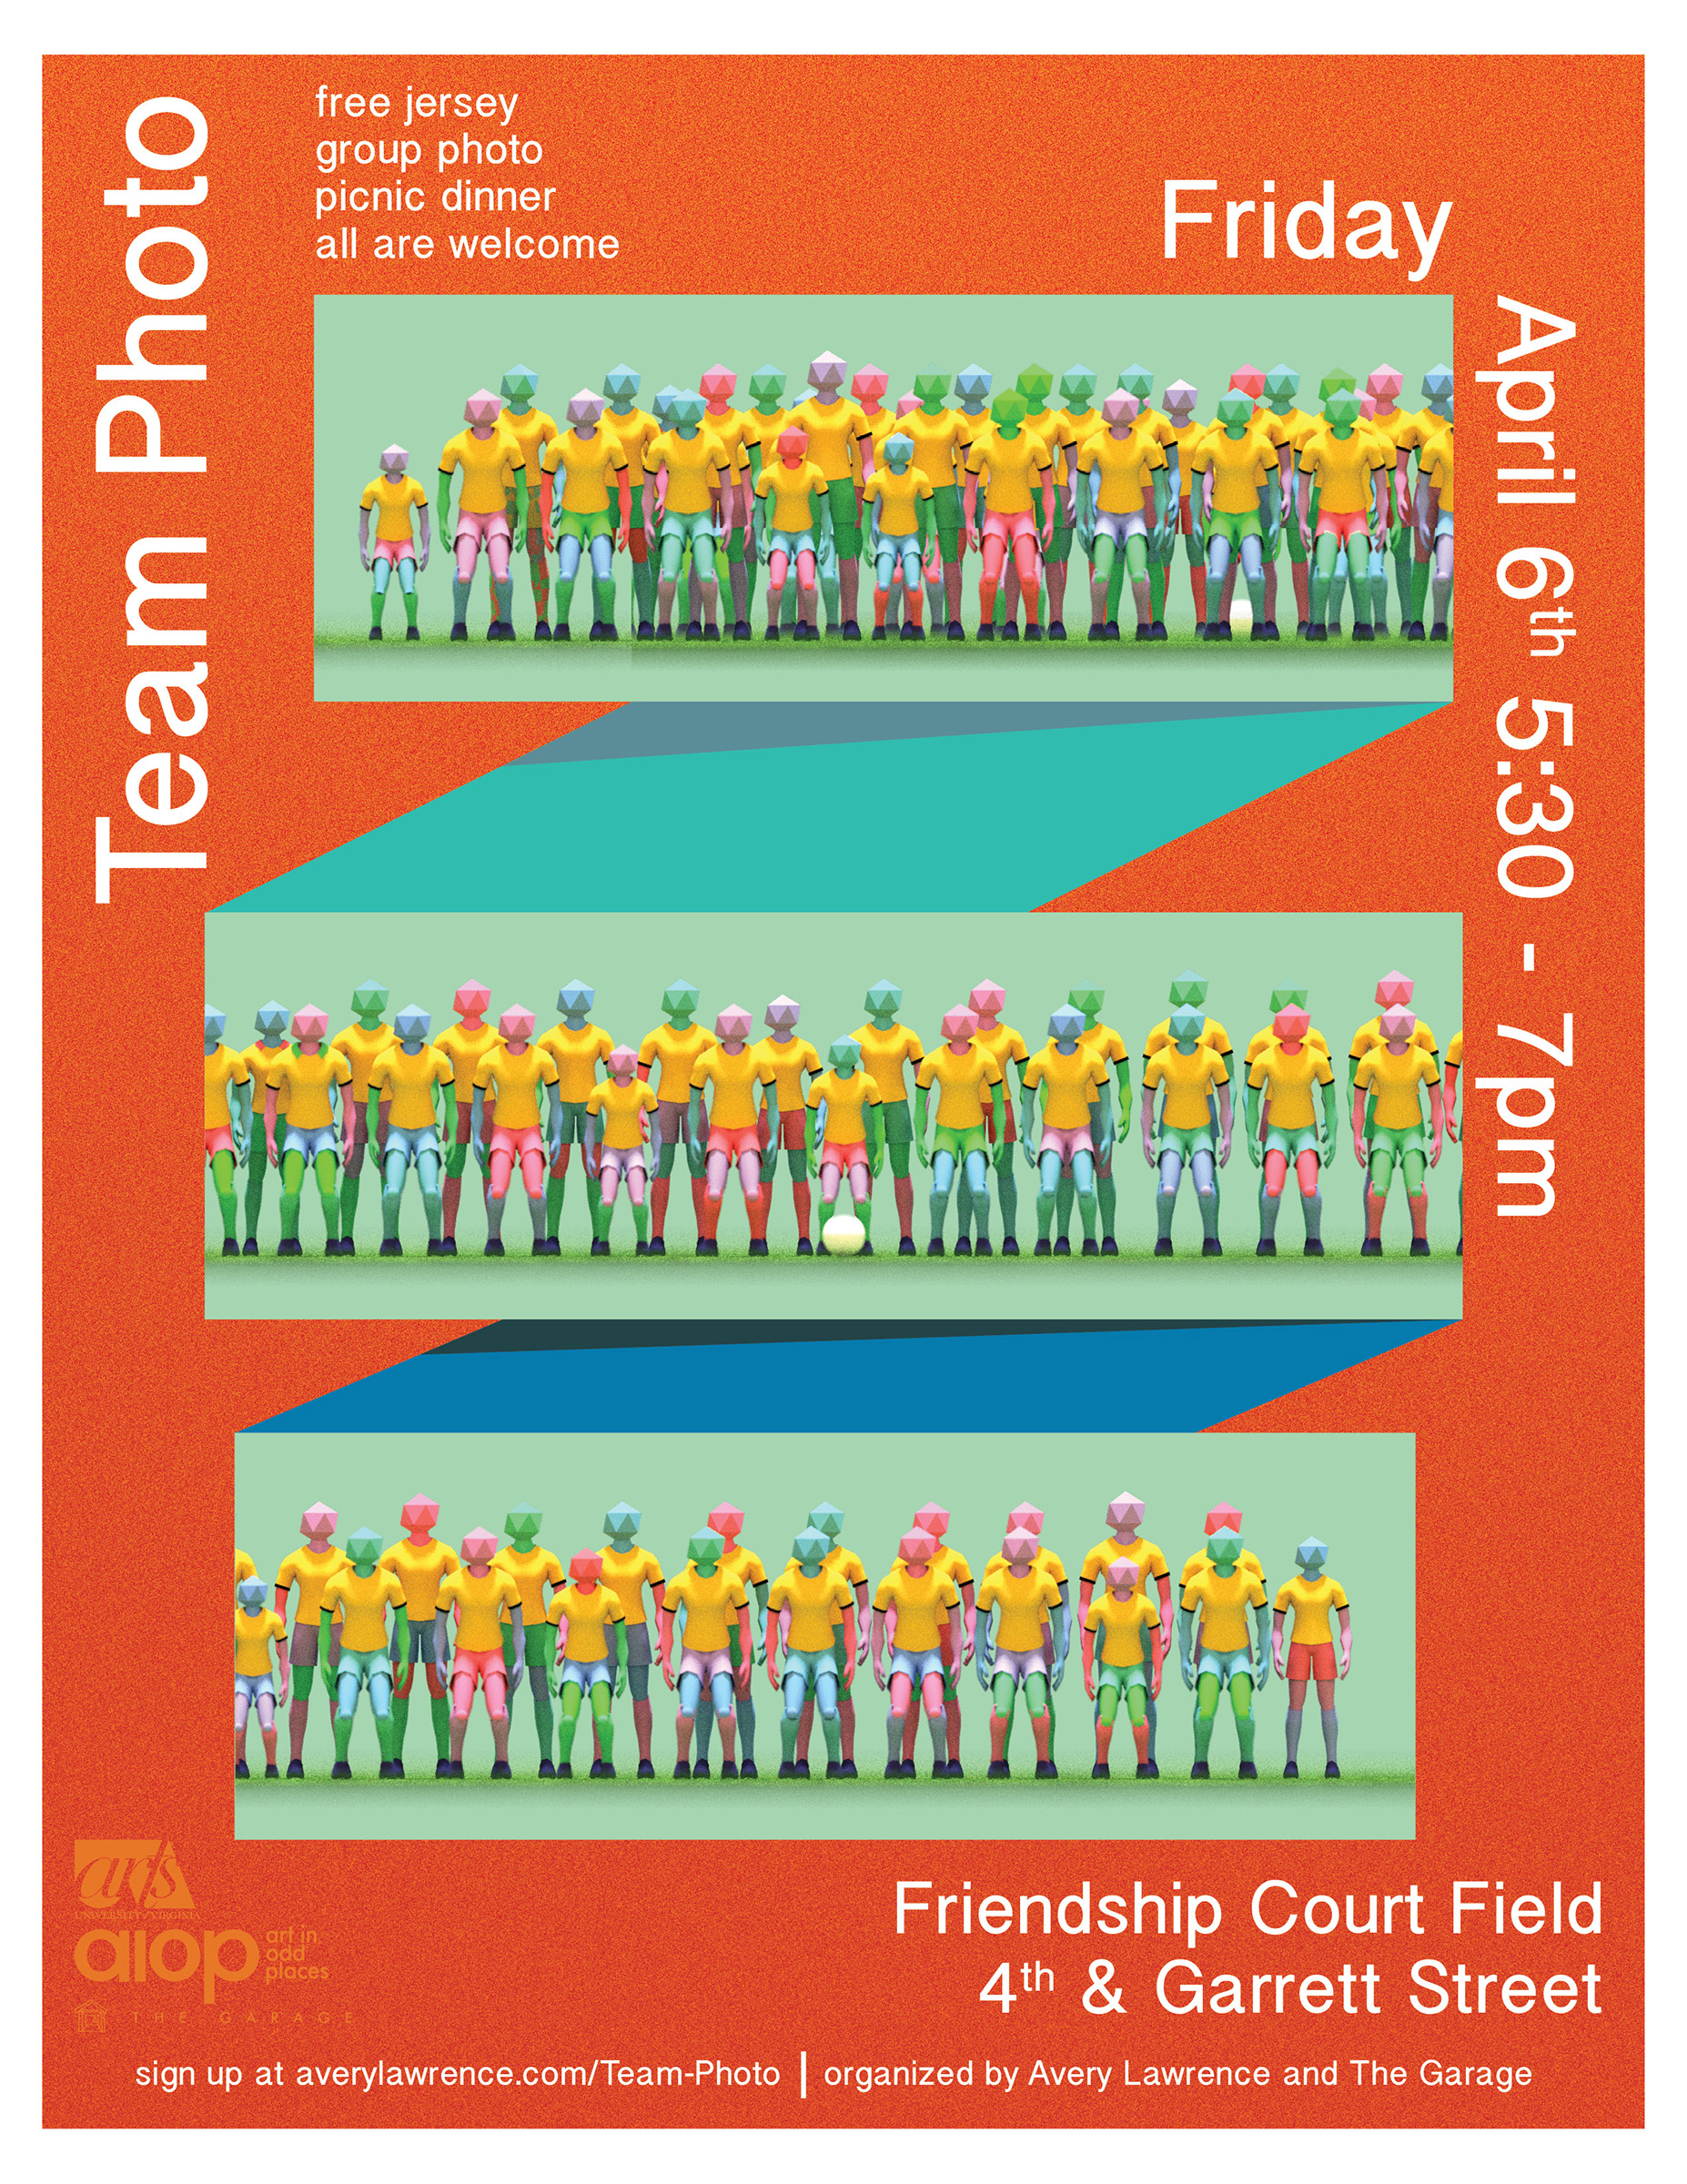 A poster featuring a ribbon-like graphic on which a group of low-poly 3D models of people pose for a team photograph. The poster advertises an event called Team Photo.